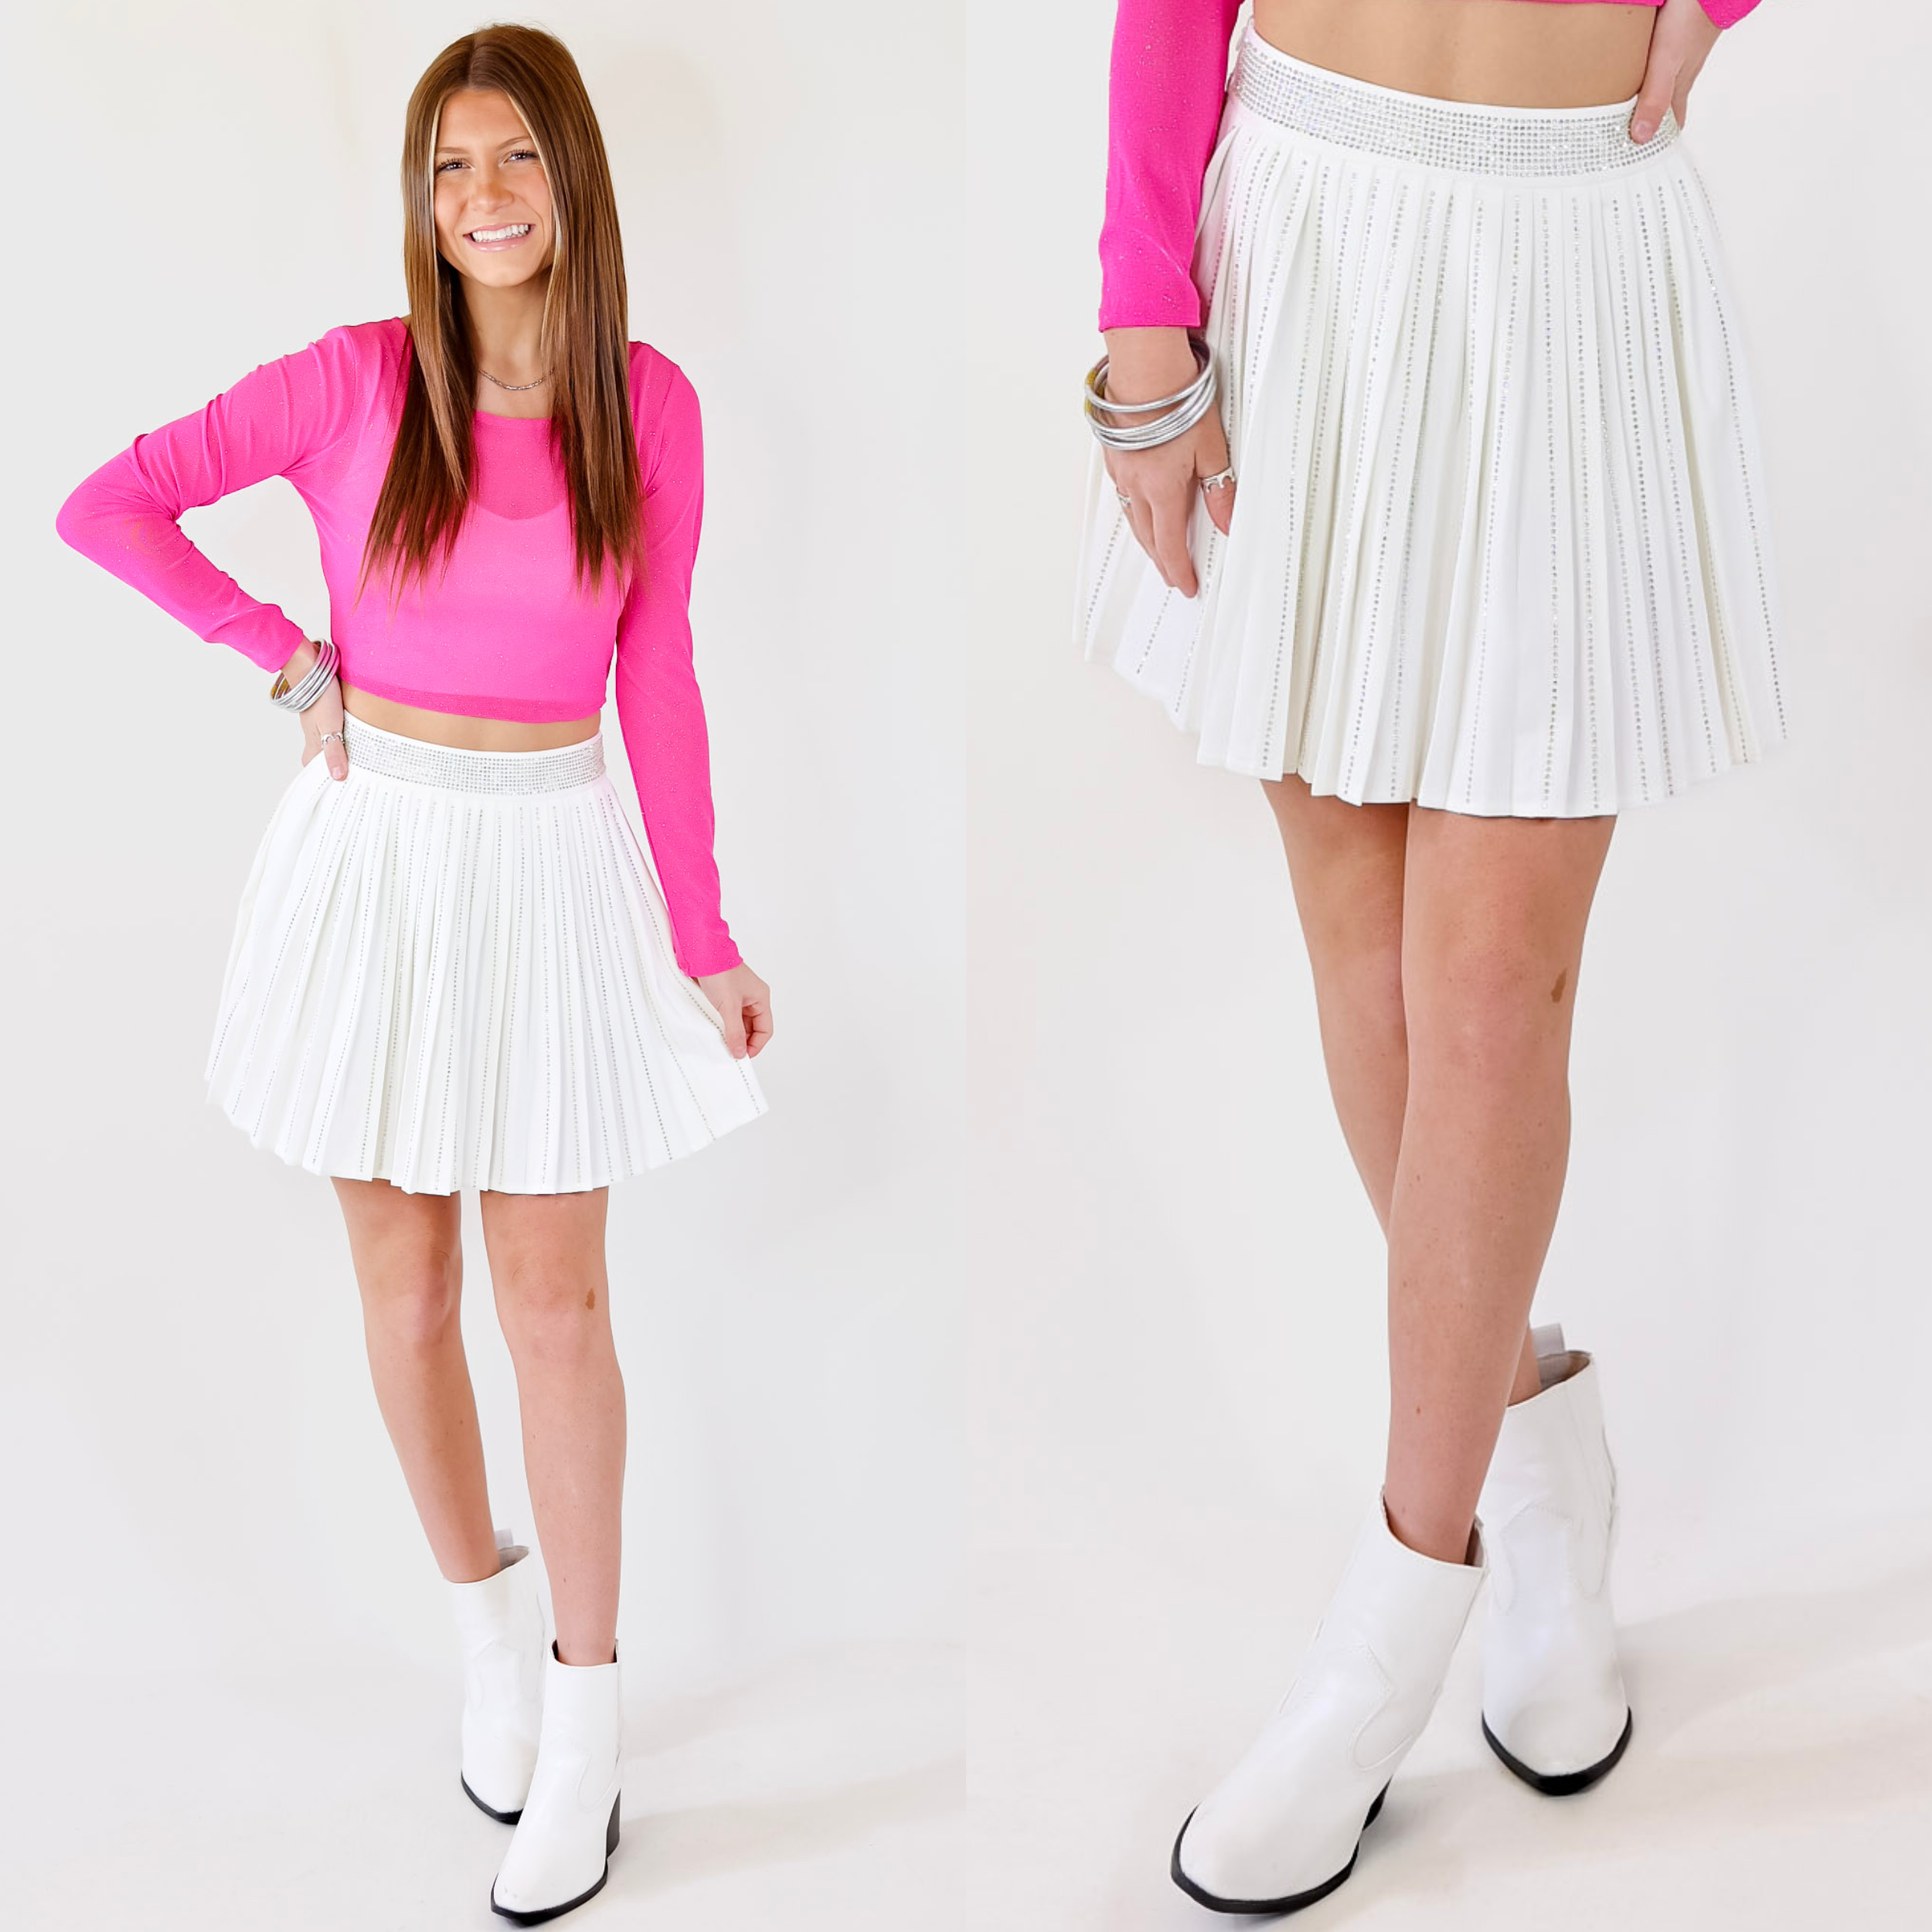 Model is wearing a white skirt featuring rhinestones on the waistband, pleated skirt, and rhinestones on the skirt.